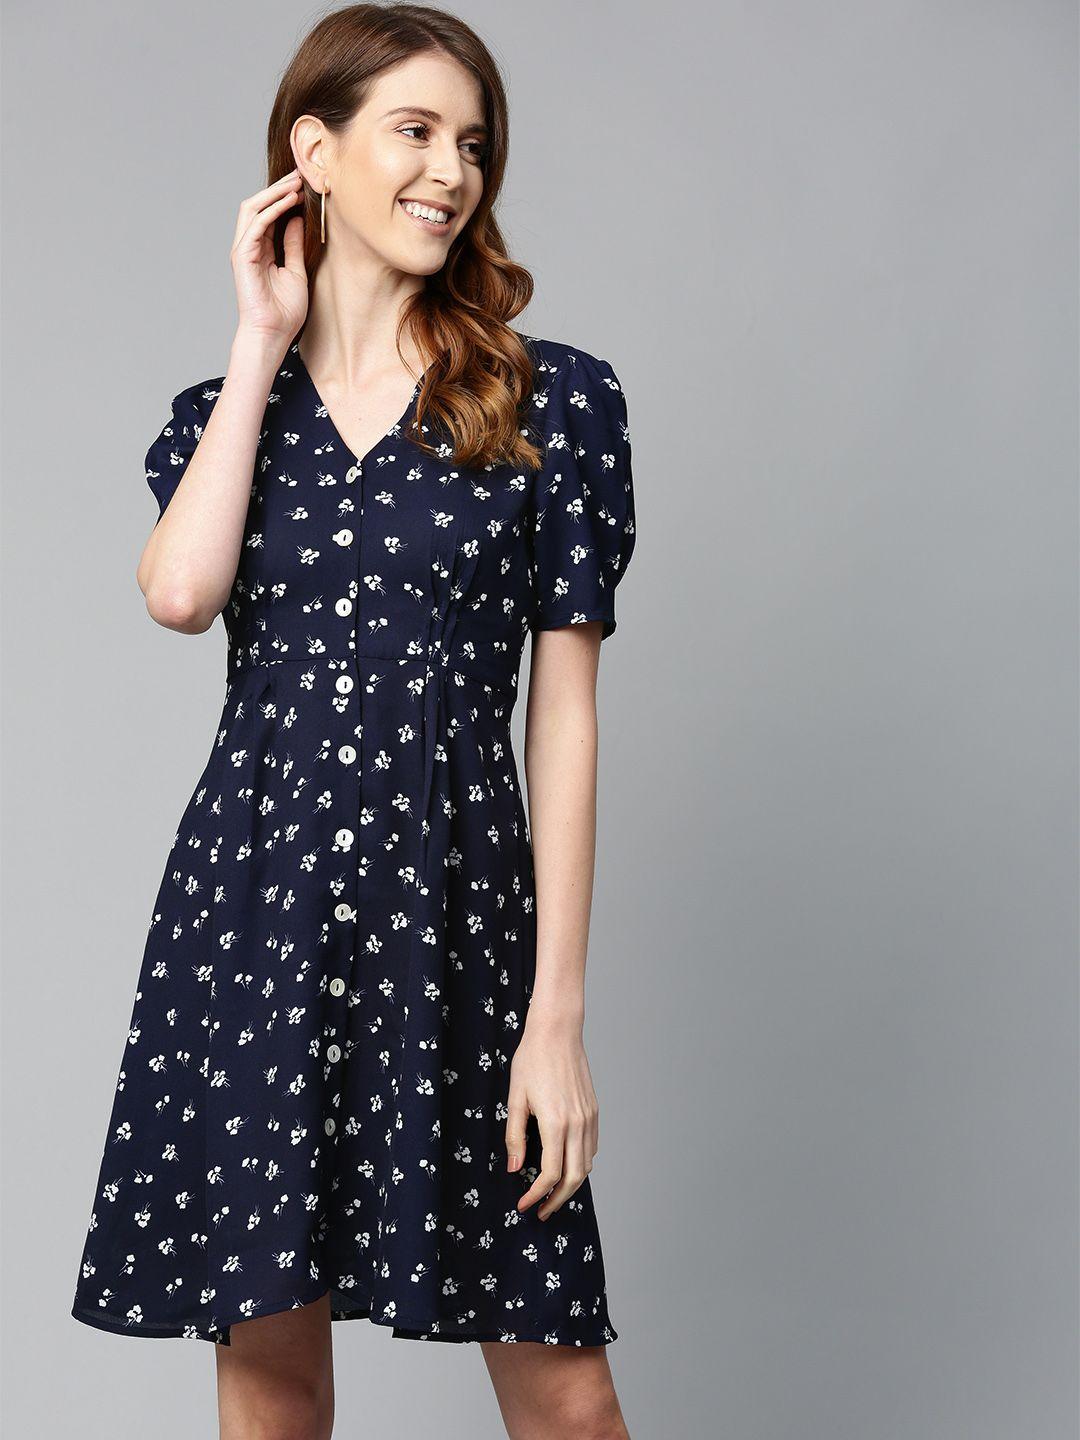 mast & harbour navy blue & white pleated floral printed a-line dress